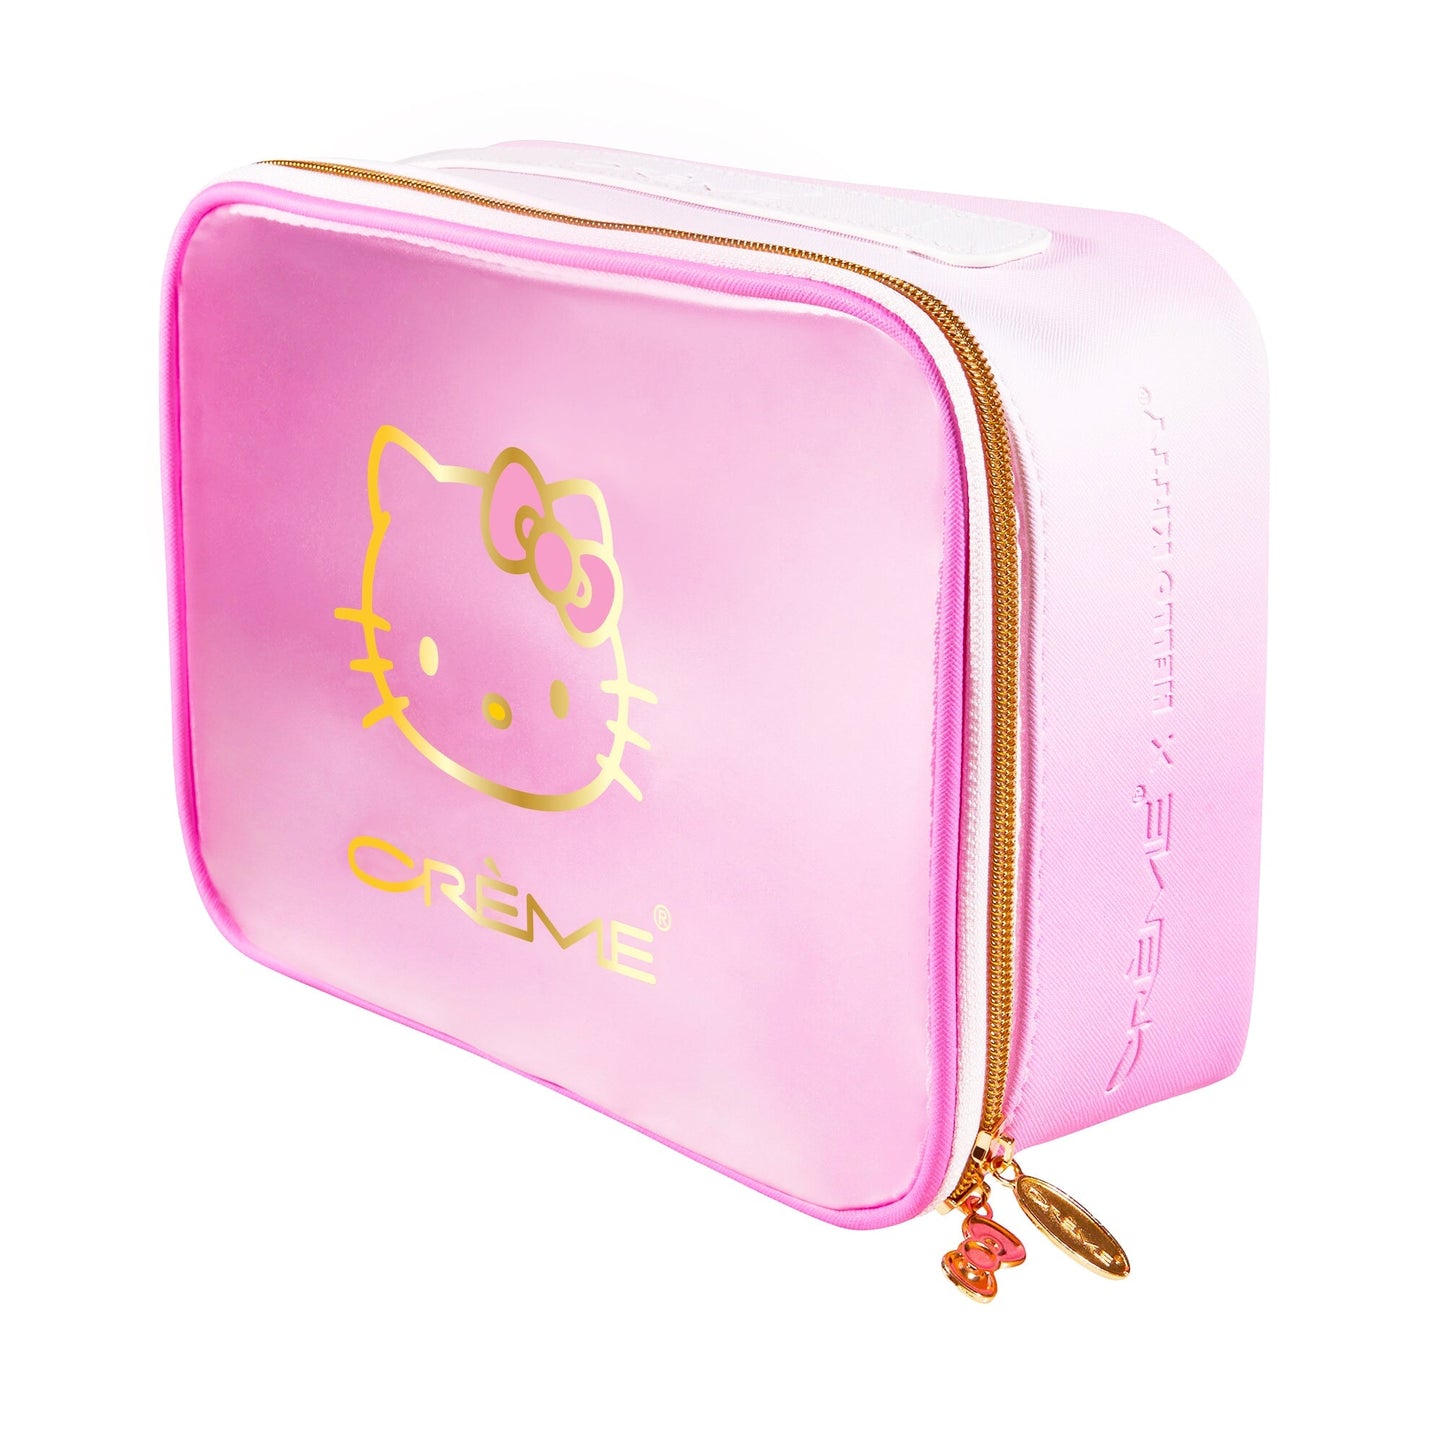 Hello Kitty Perfect Pink Travel Case Makeup Pouch The Crème Shop x Sanrio 